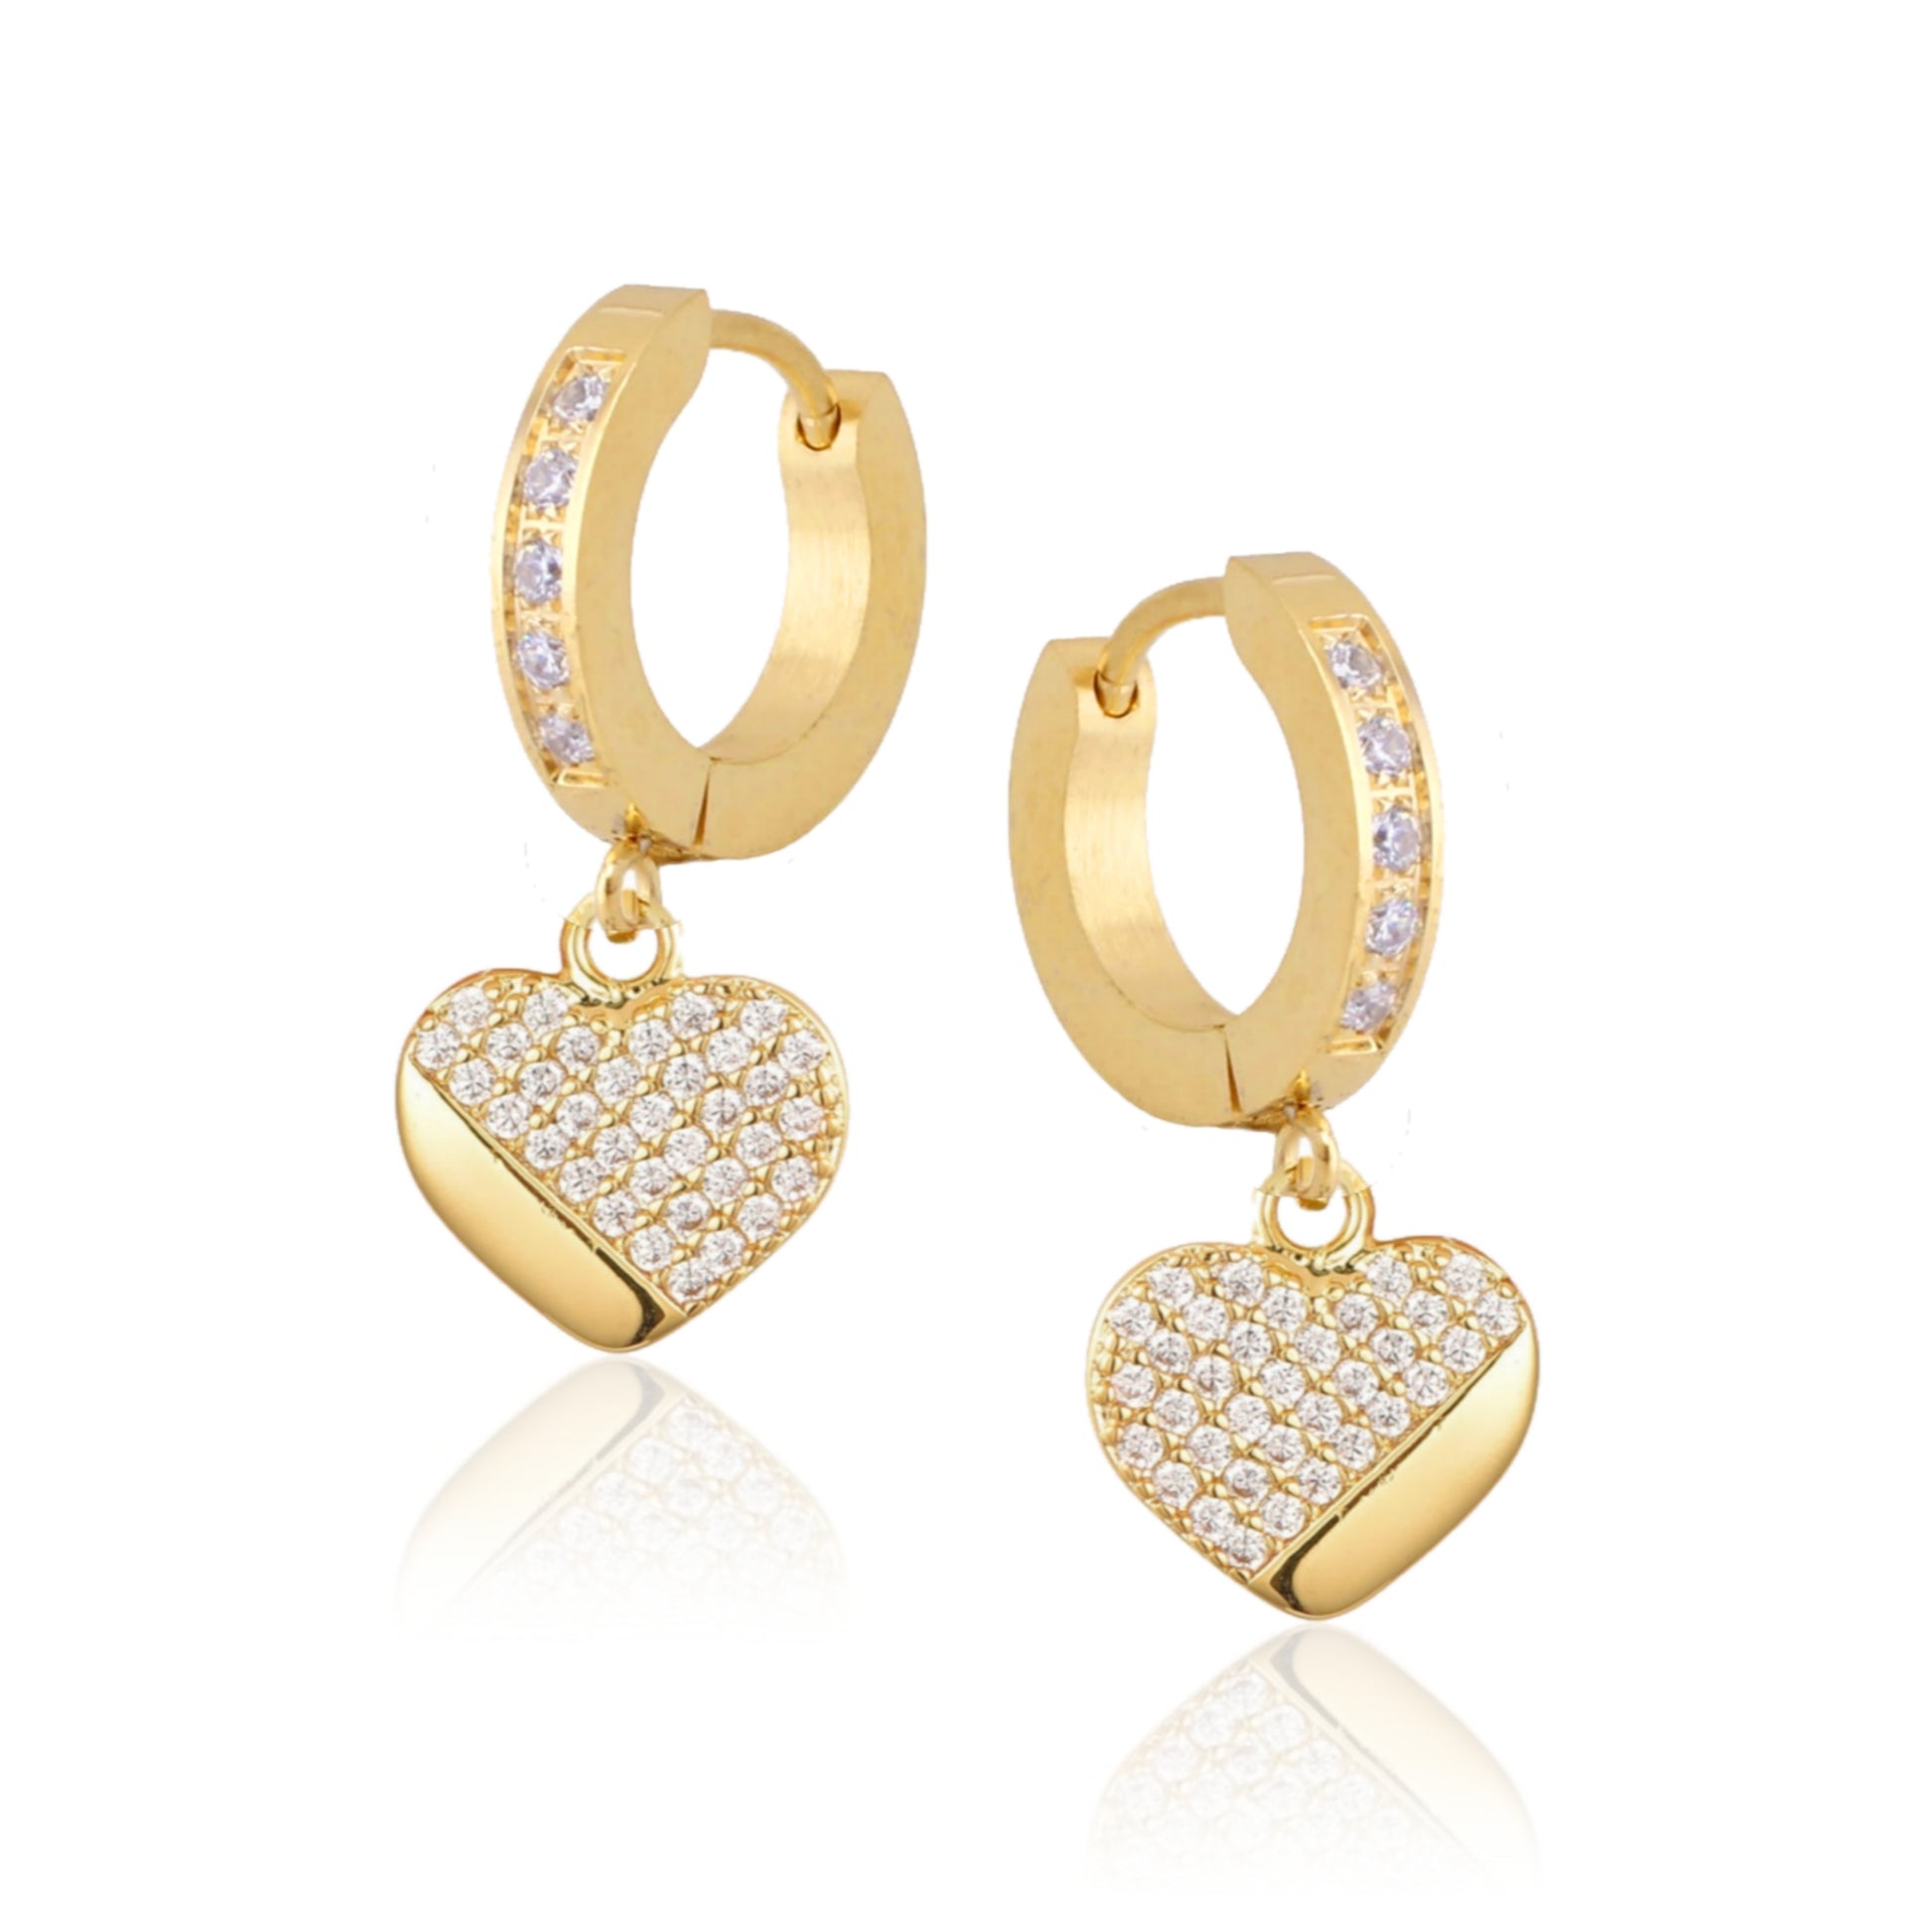 Gold Plated Surgical Steel ¾ CZ Heart Shaped Earrings - HK Jewels